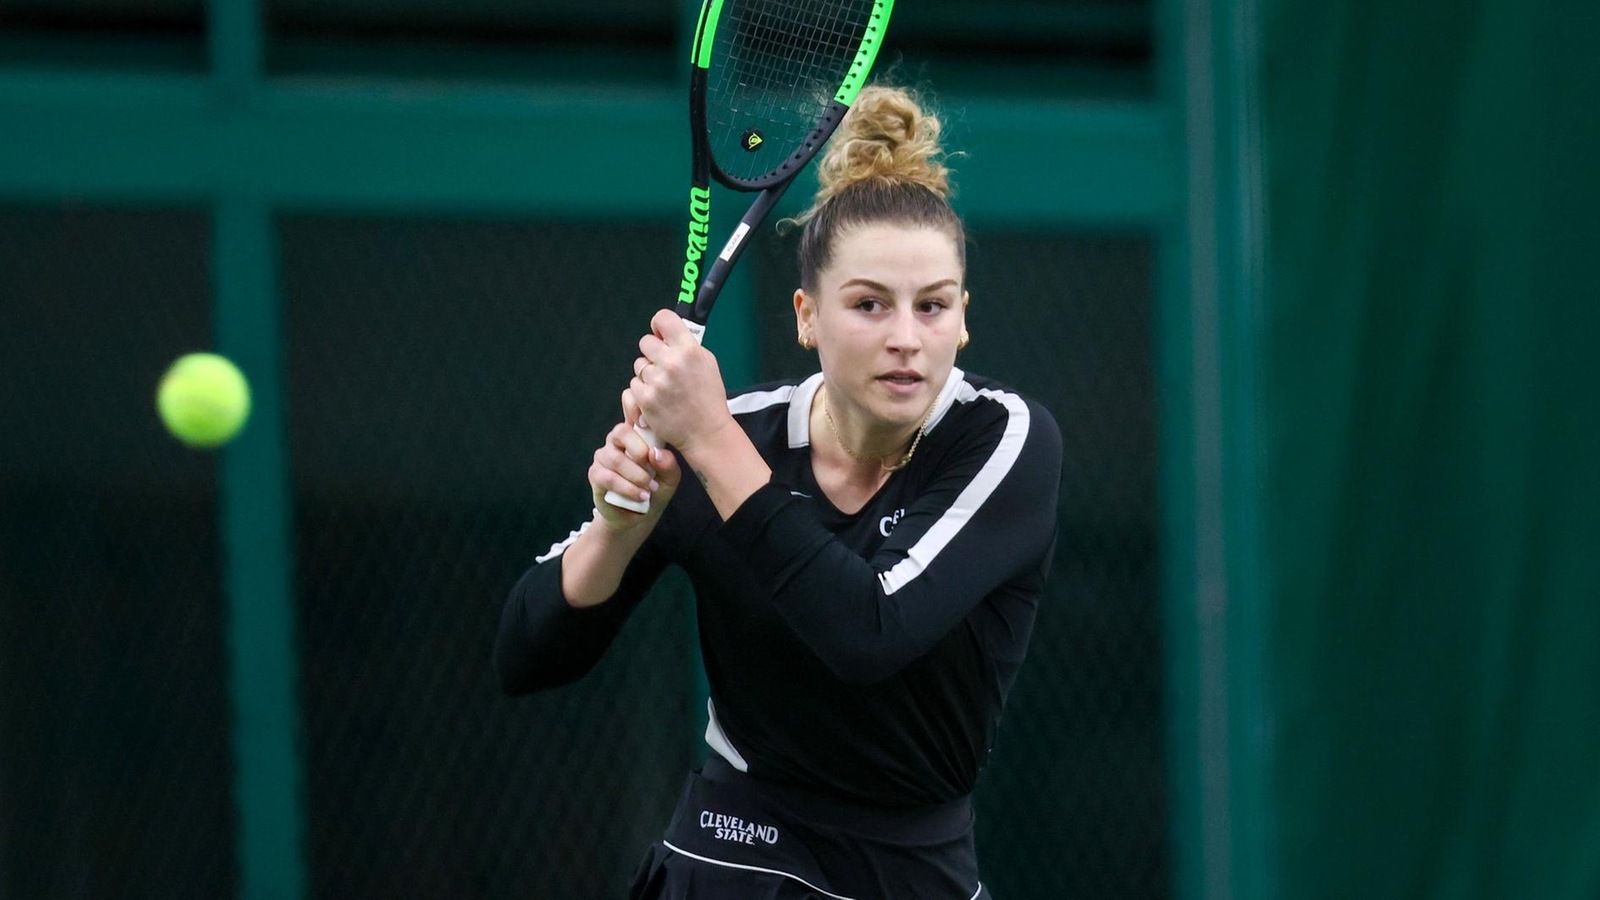 Cleveland State Women’s Tennis Continues Spring Campaign With Trio Of Matches